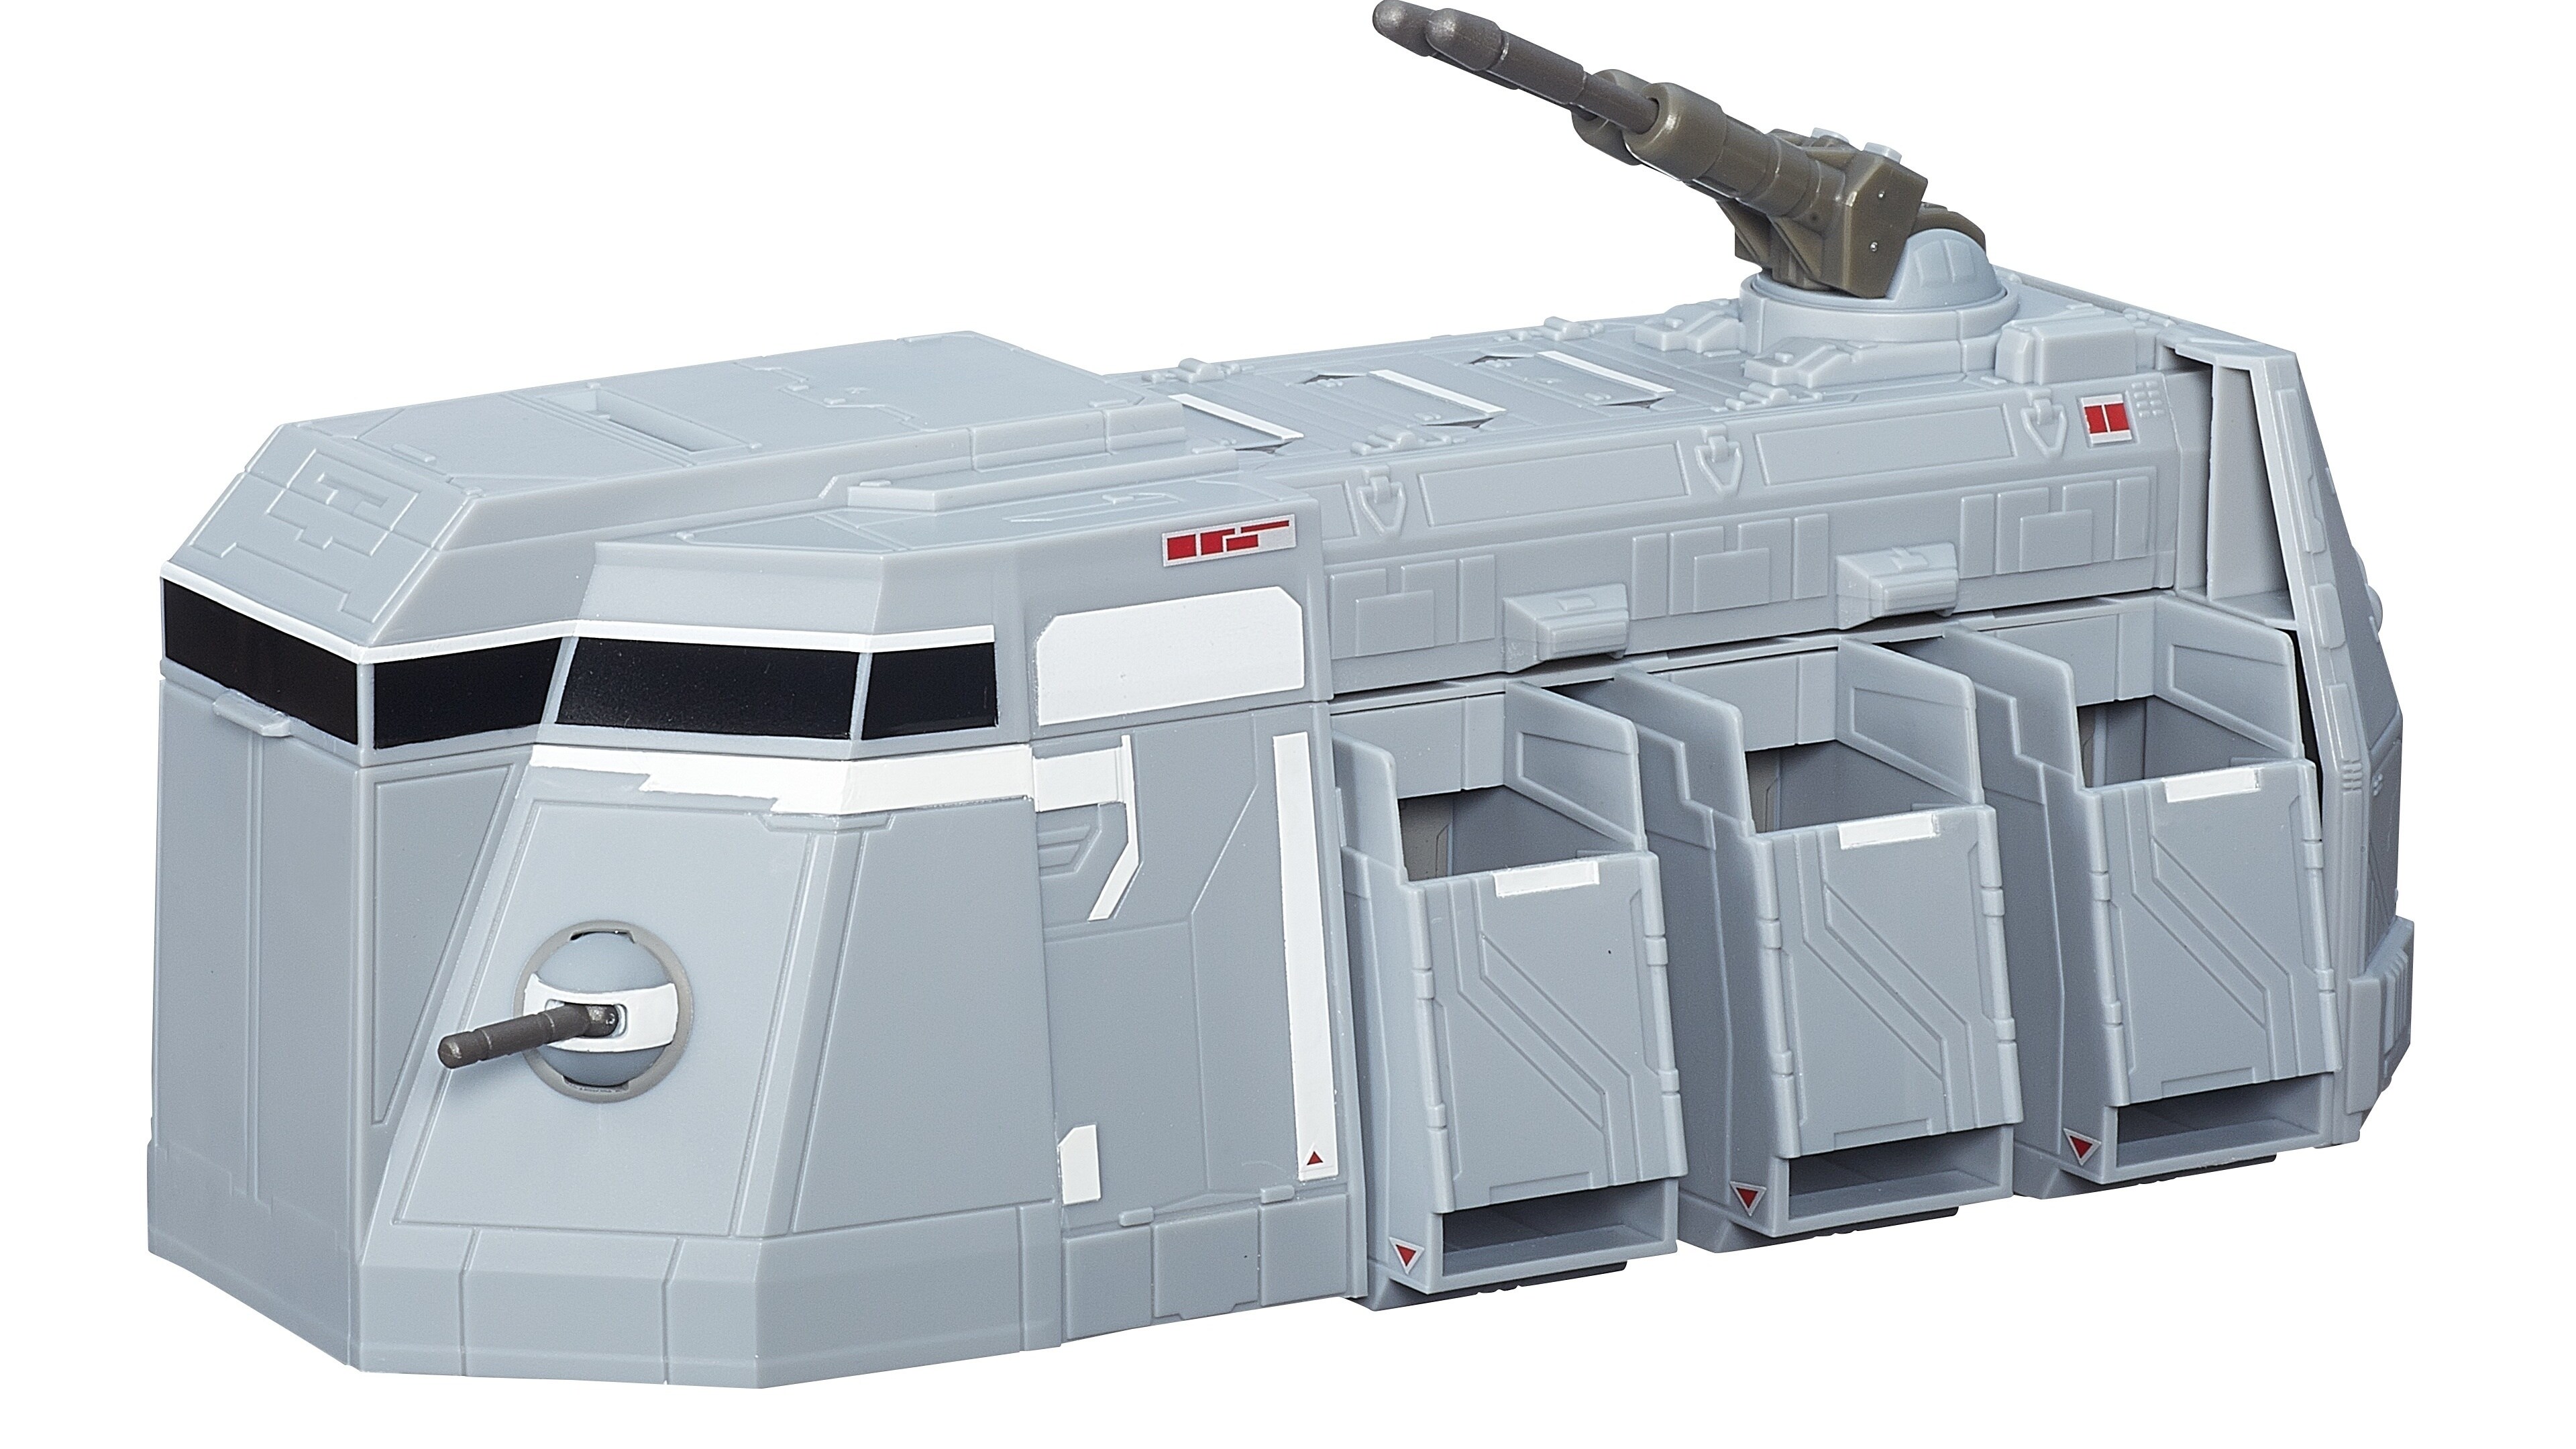 An Iconic Star Wars Toy, the Imperial Troop Transport, Returns to Shelves and Screens